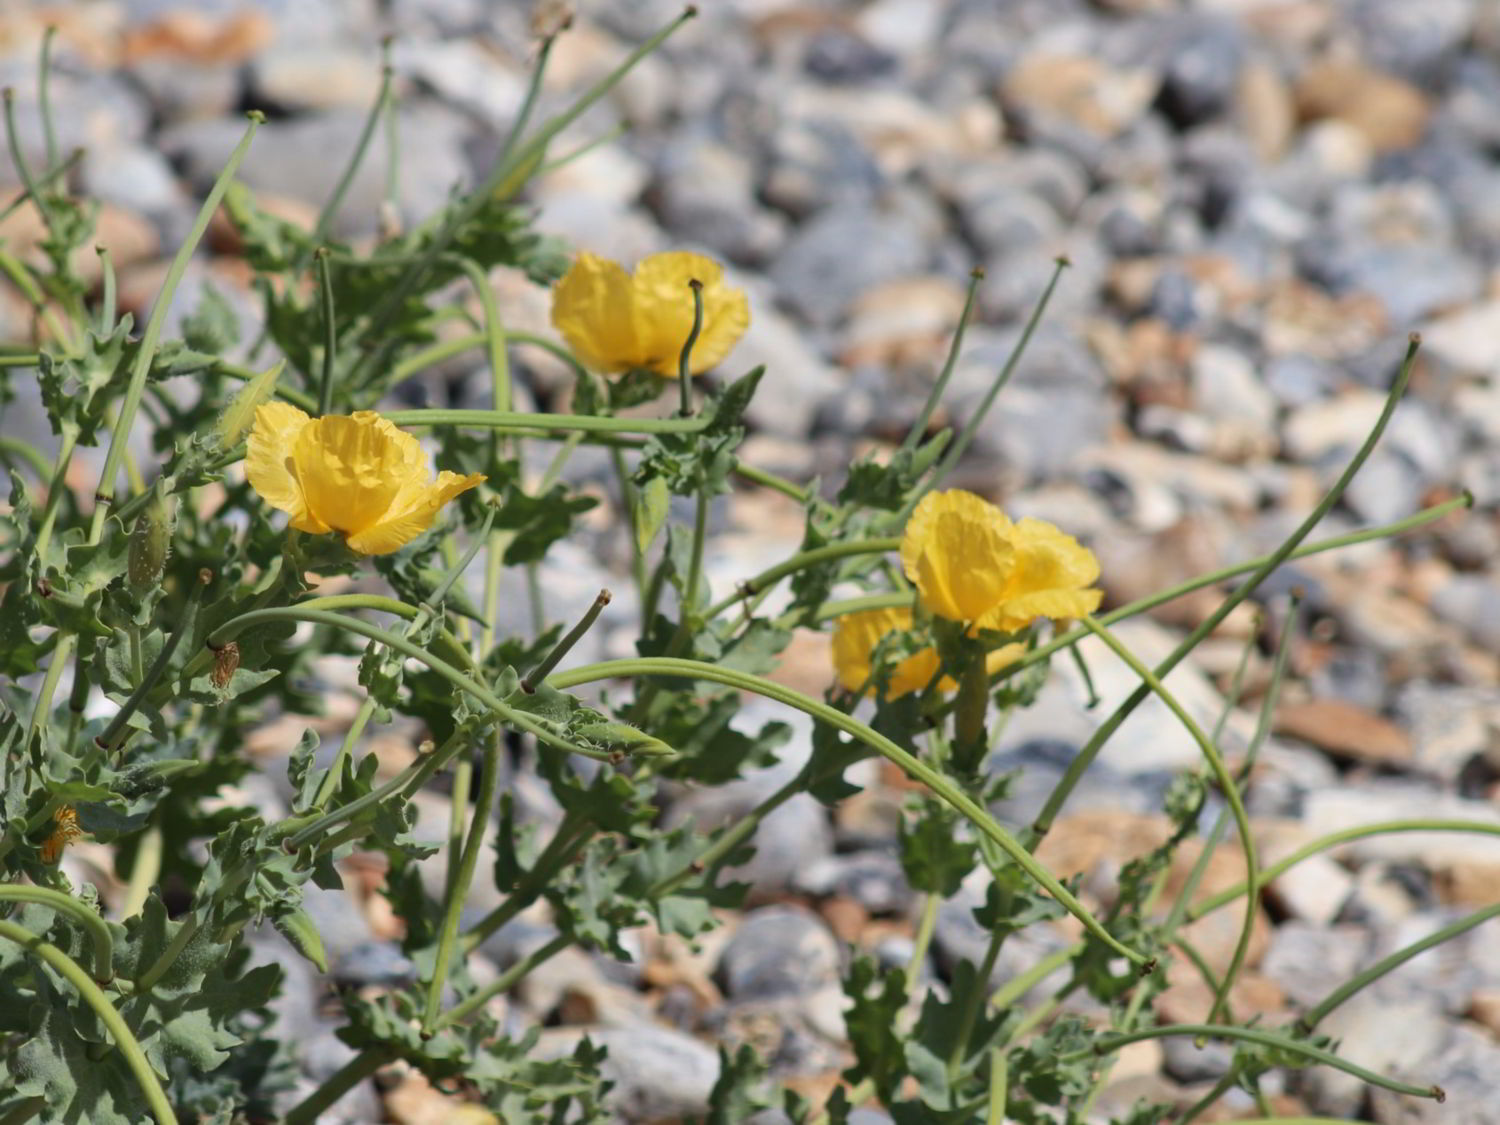 Yellow-horned Poppy flowers in front of a vegetated bank, Sussex